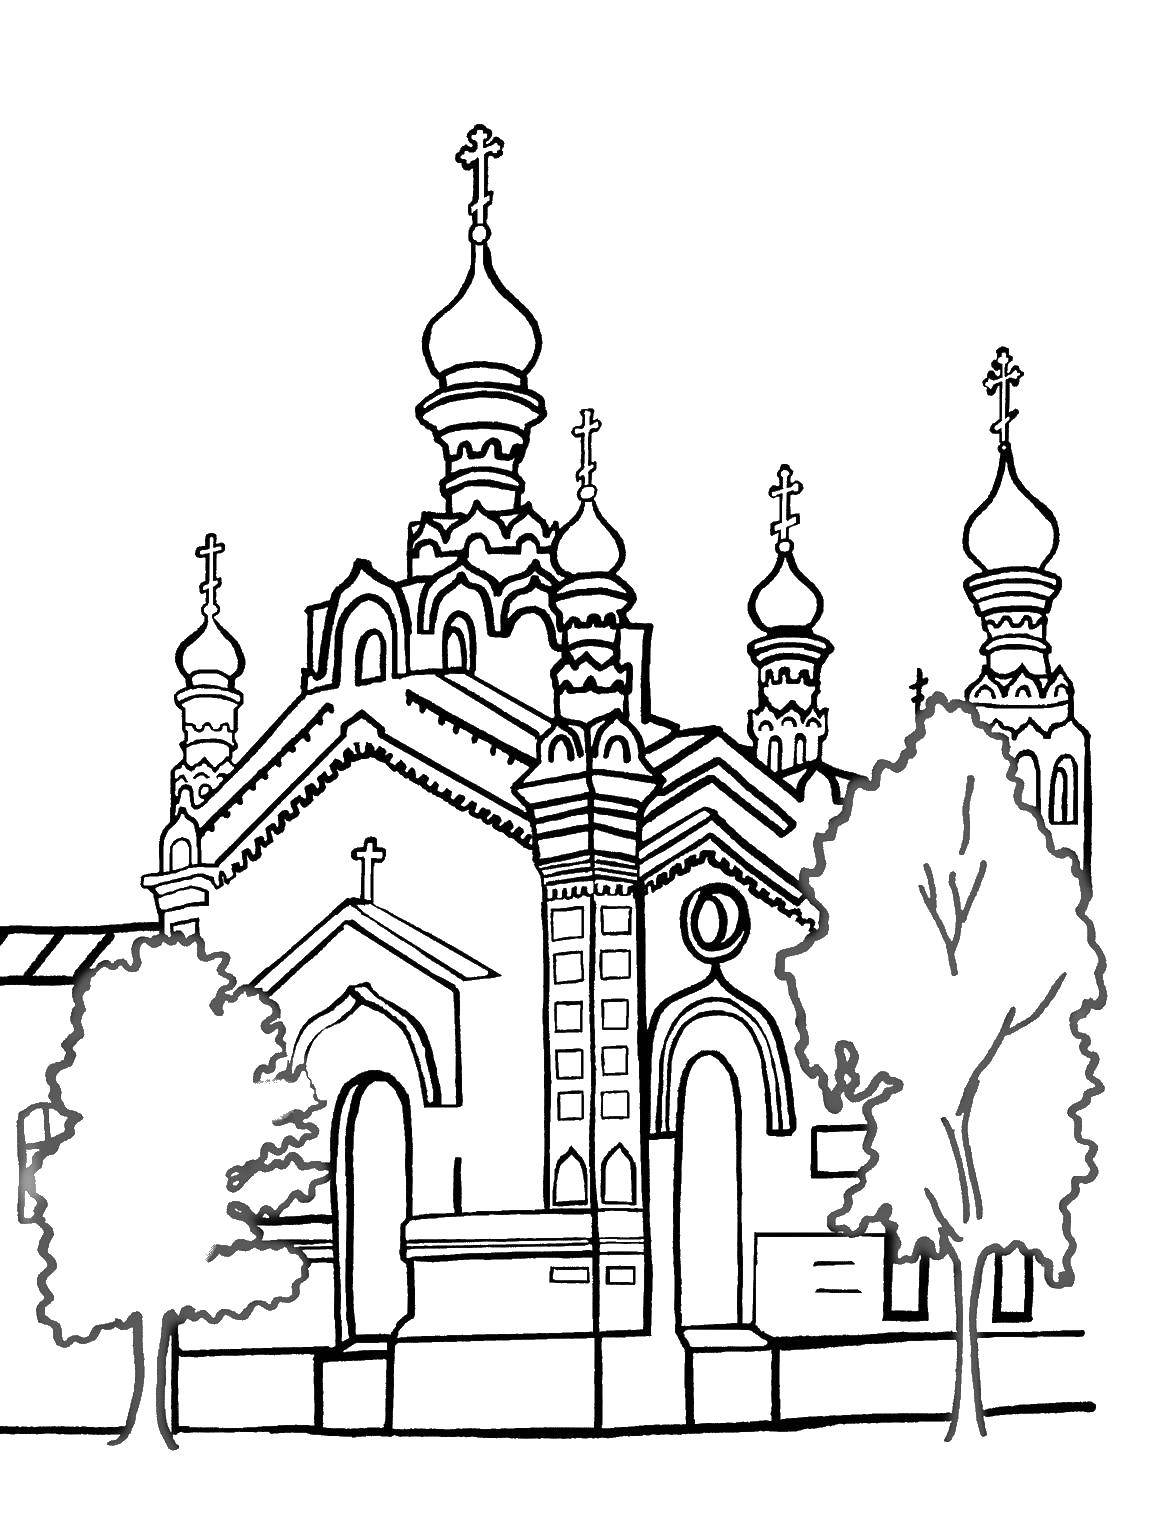 Coloring Beautiful Church. Category the Church. Tags:  The Church.